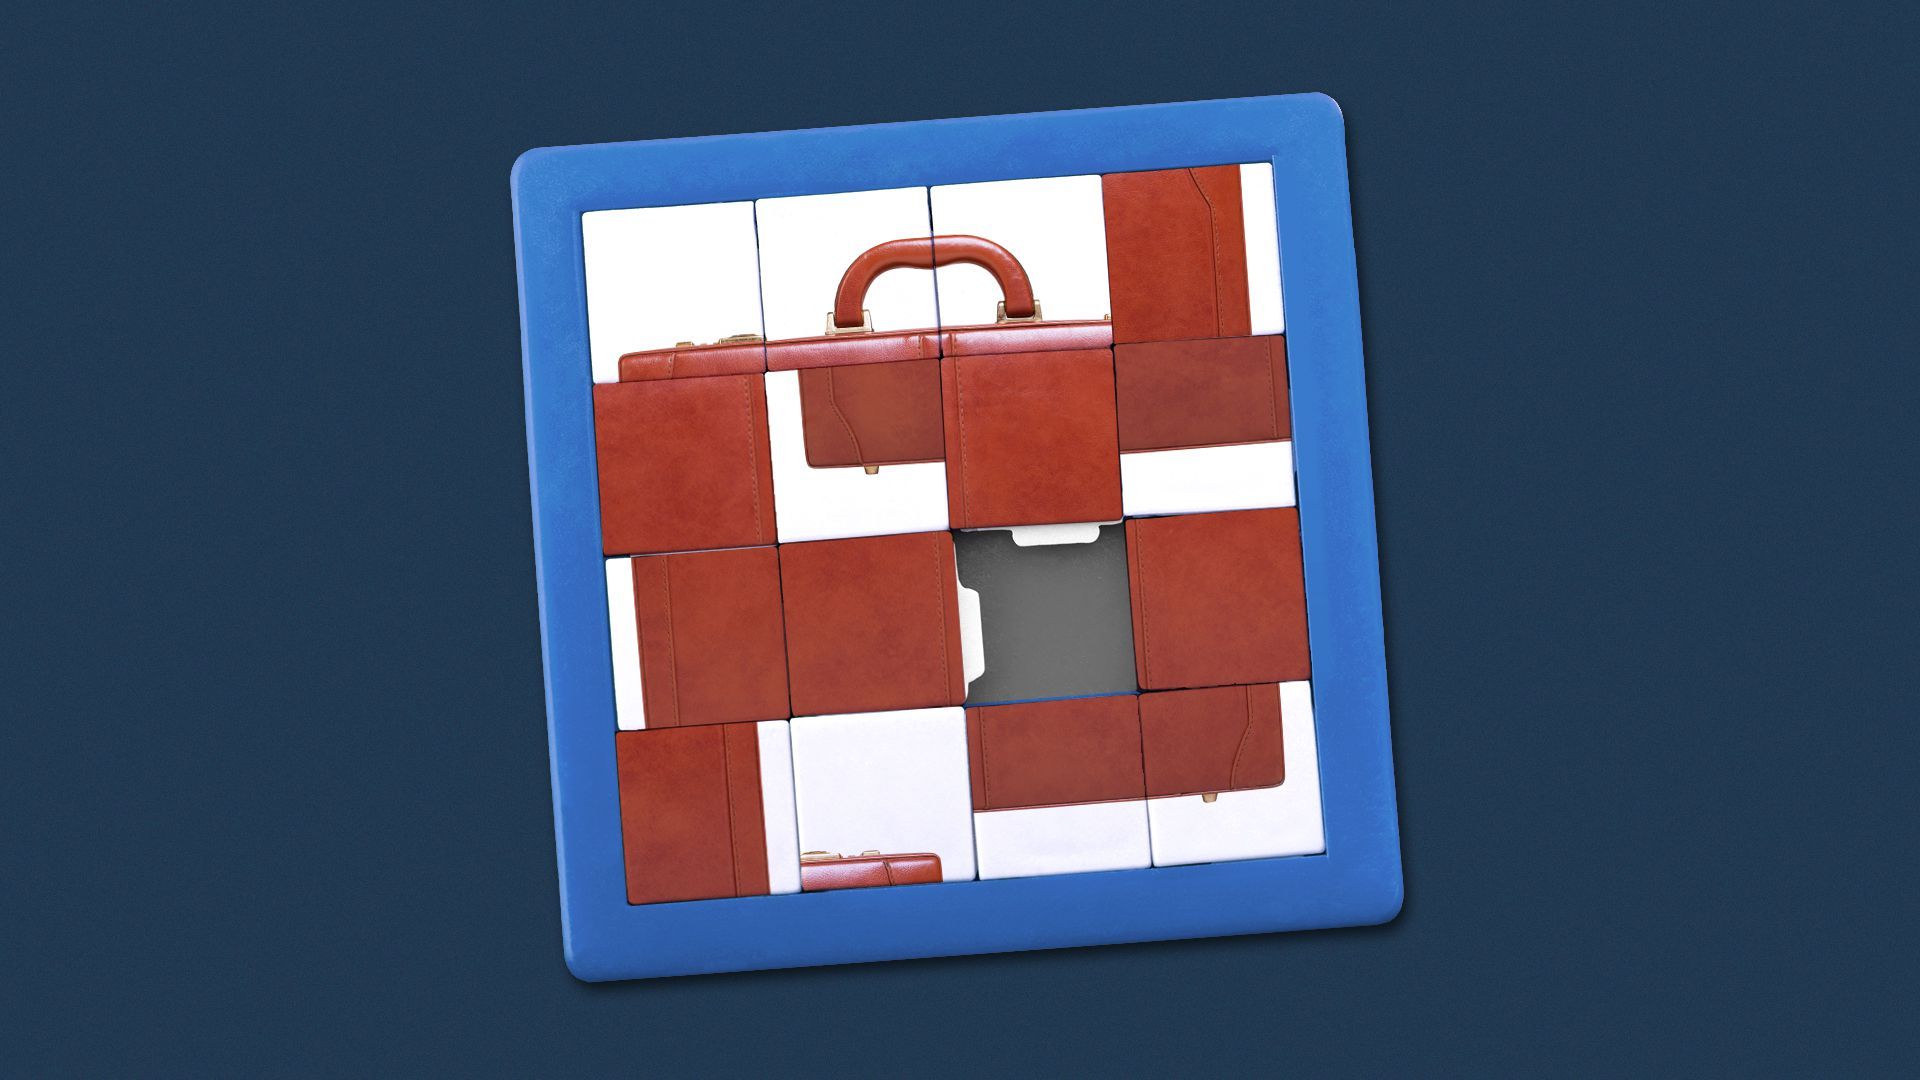 Illustration of an unsolved tile puzzle game featuring a briefcase.